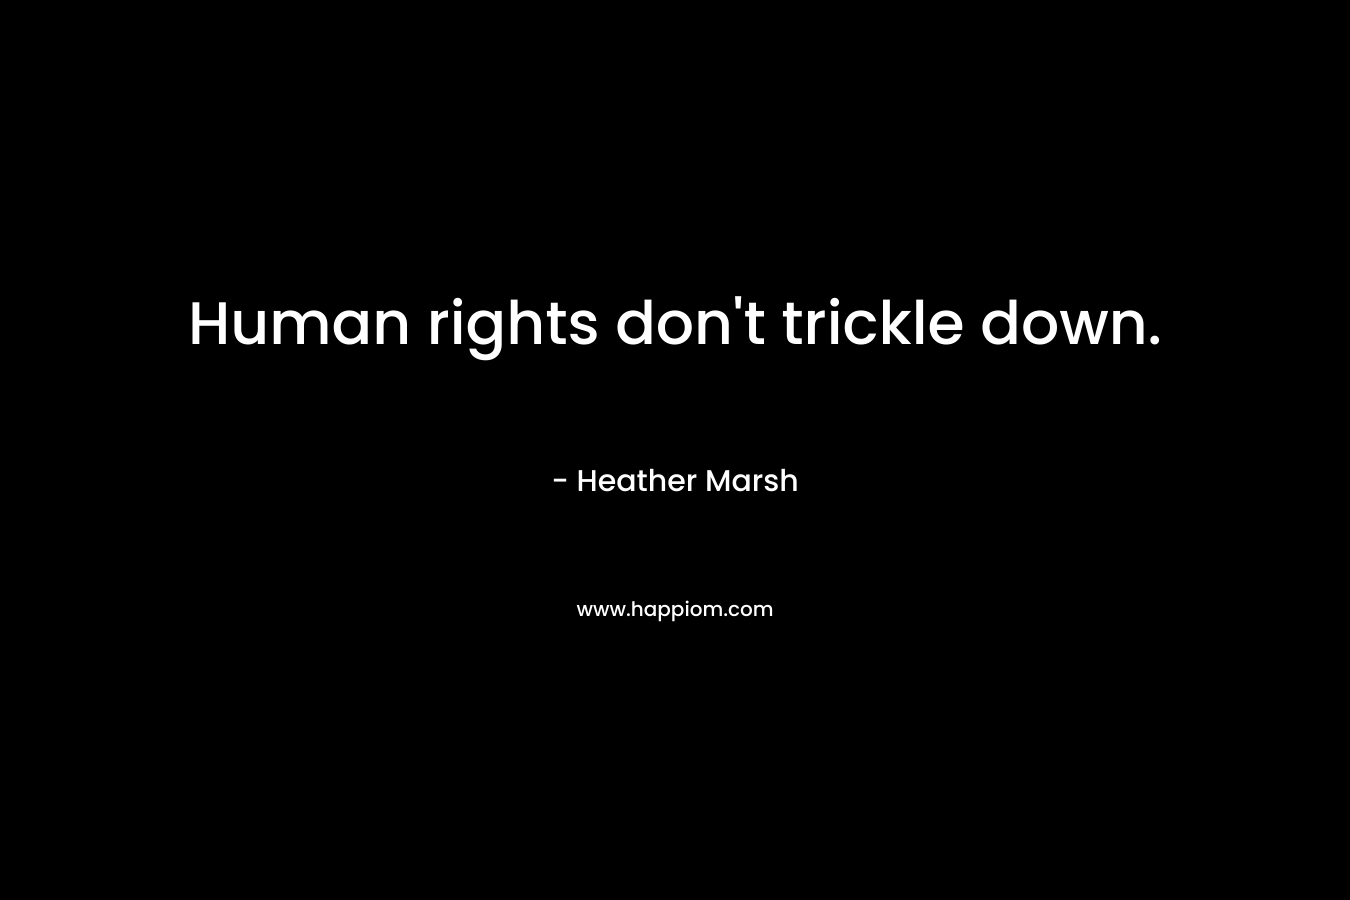 Human rights don't trickle down.